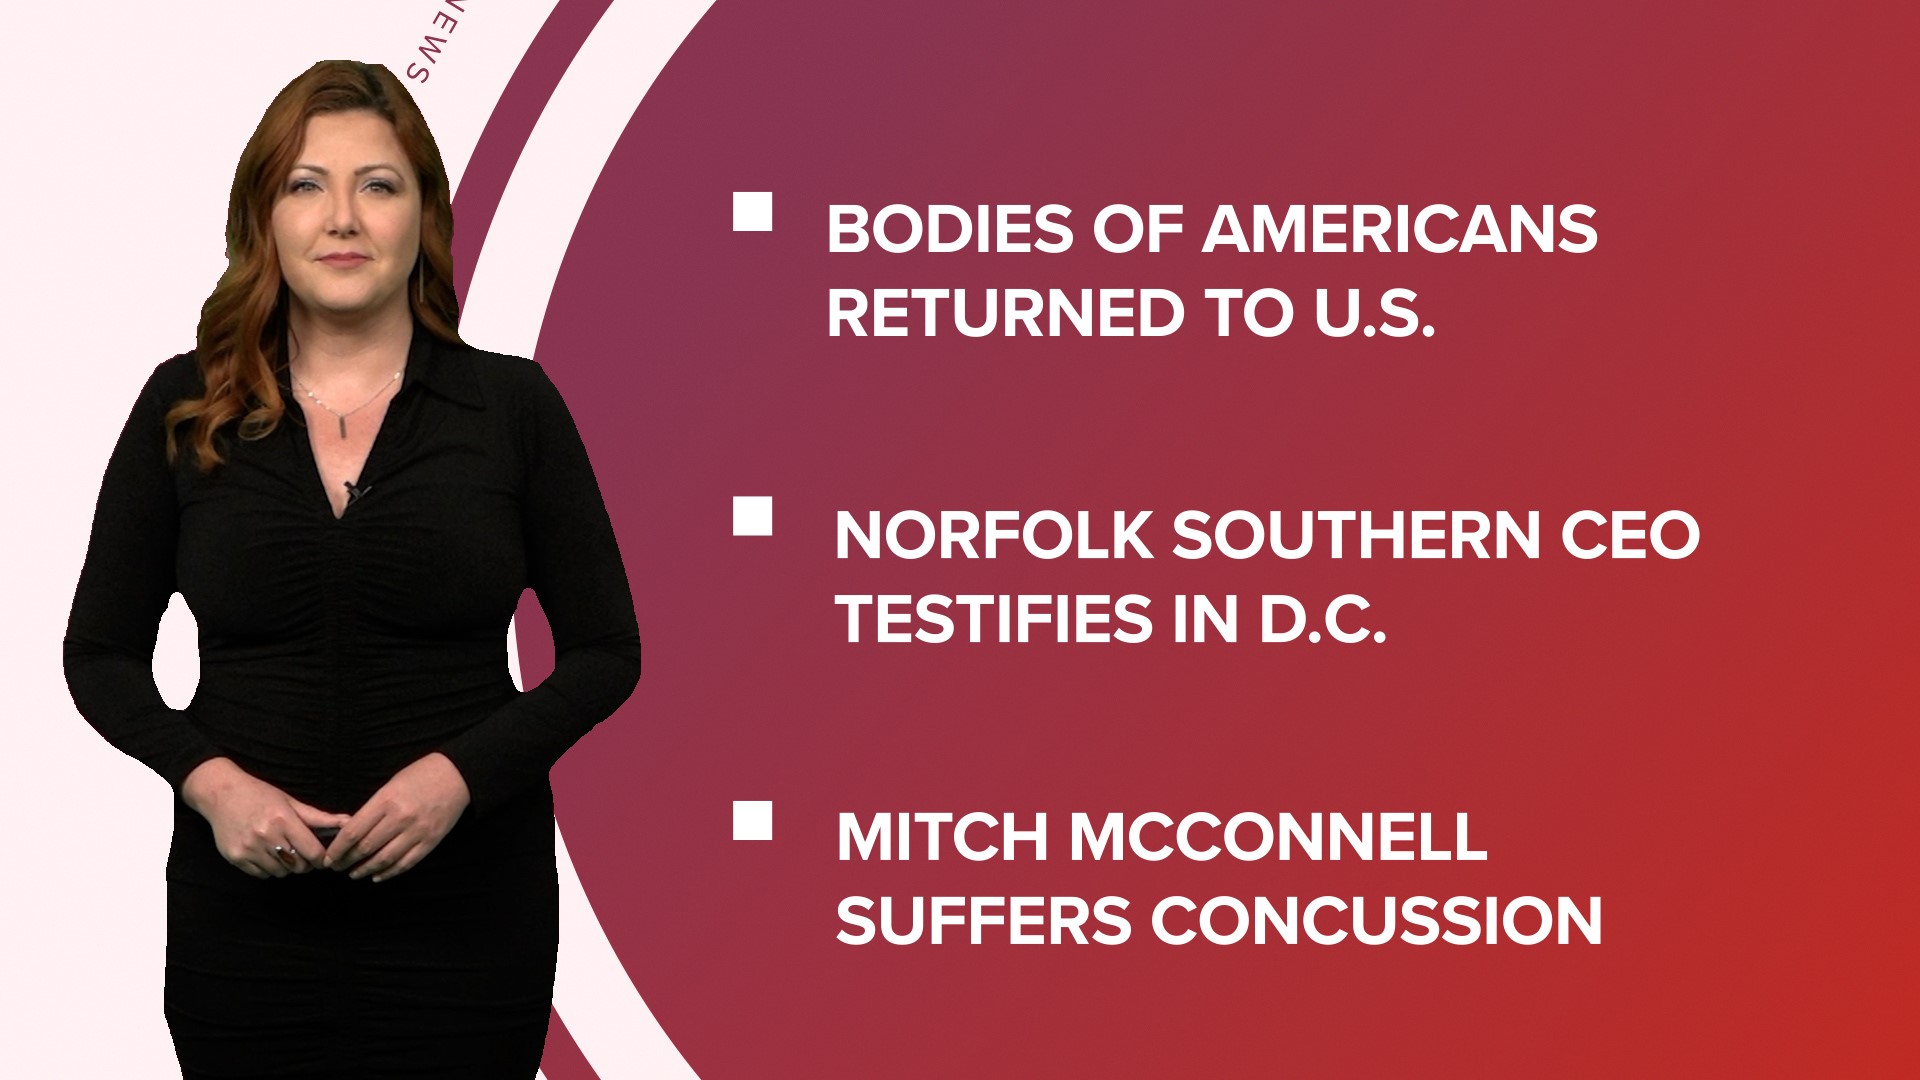 A look at what is happening in the news from an apparent cartel apology to Norfolk Southern CEO testifying and confusion over sale of abortion pills.